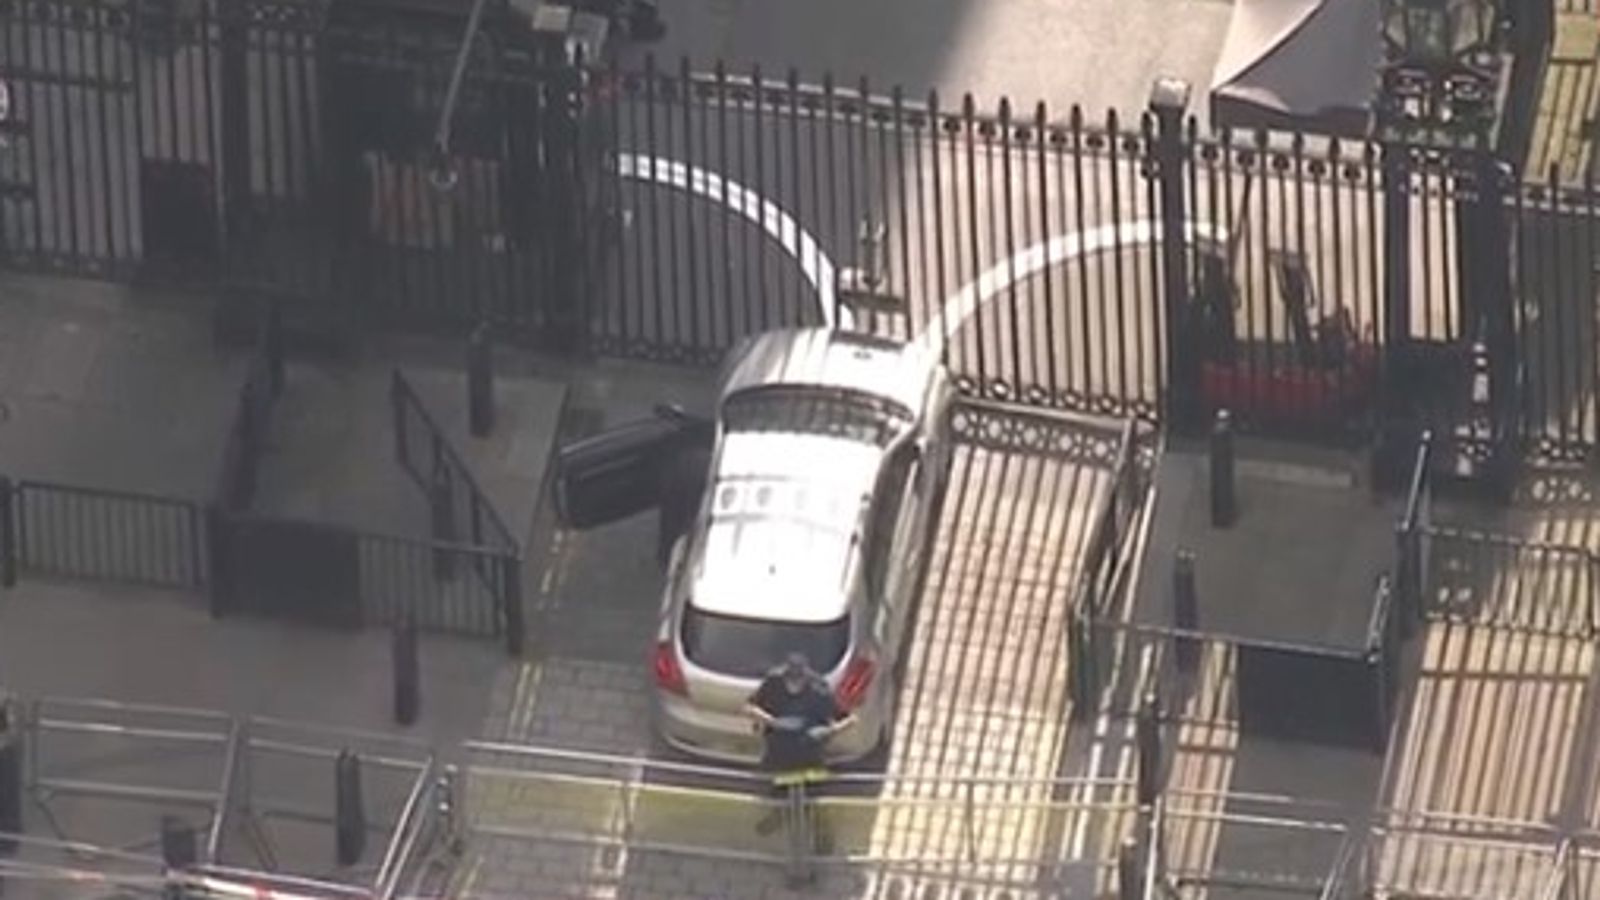 The real car crashed into Downing Street gates